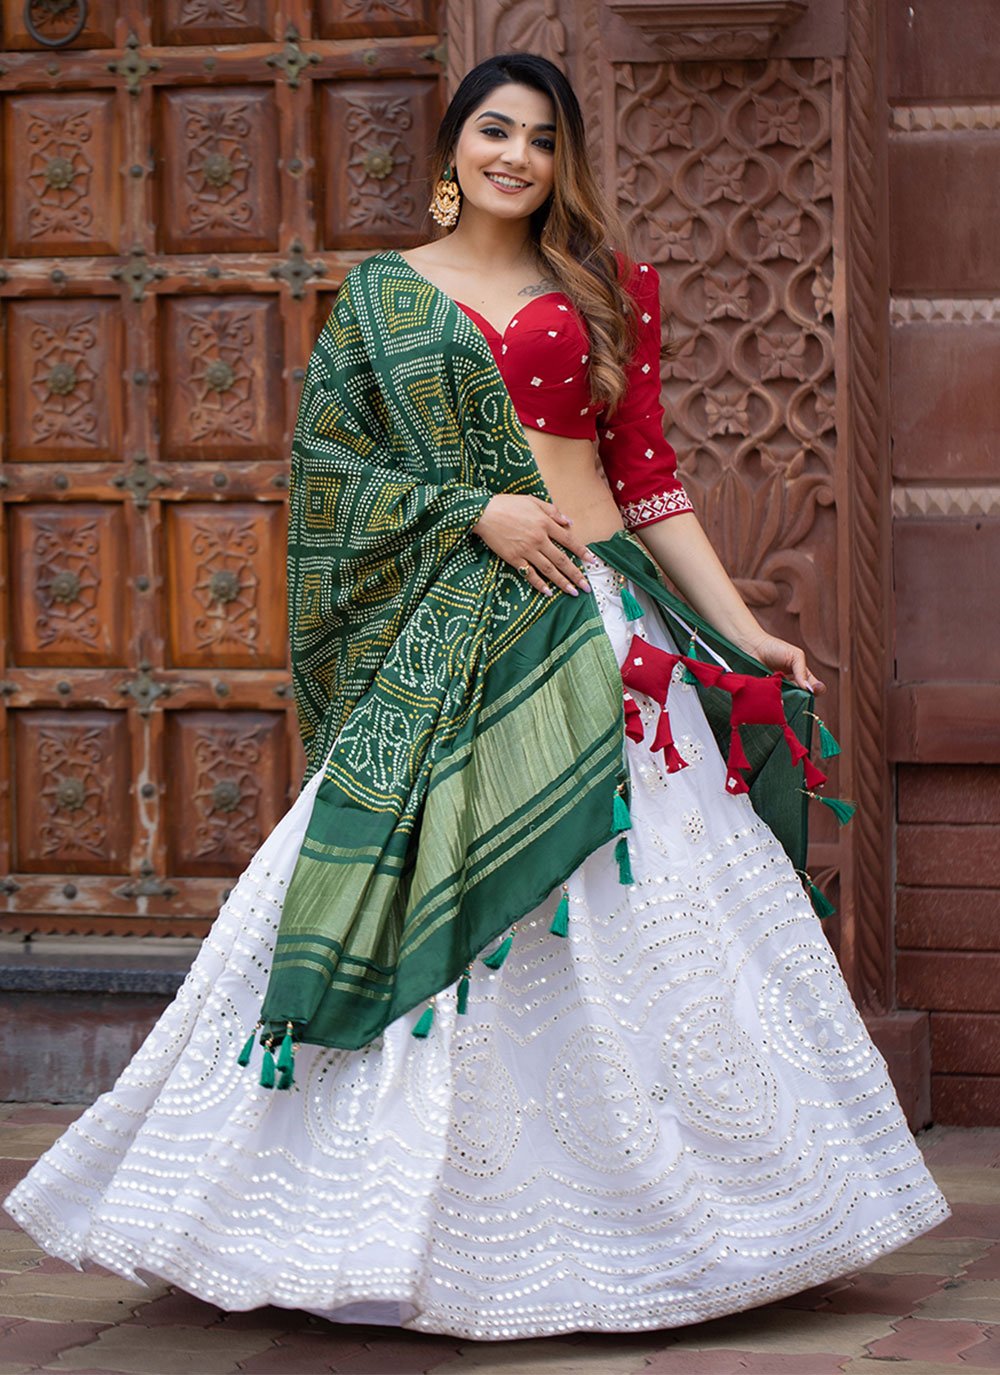 10 Stunning Designs of White Lehenga Choli for Special Occasions